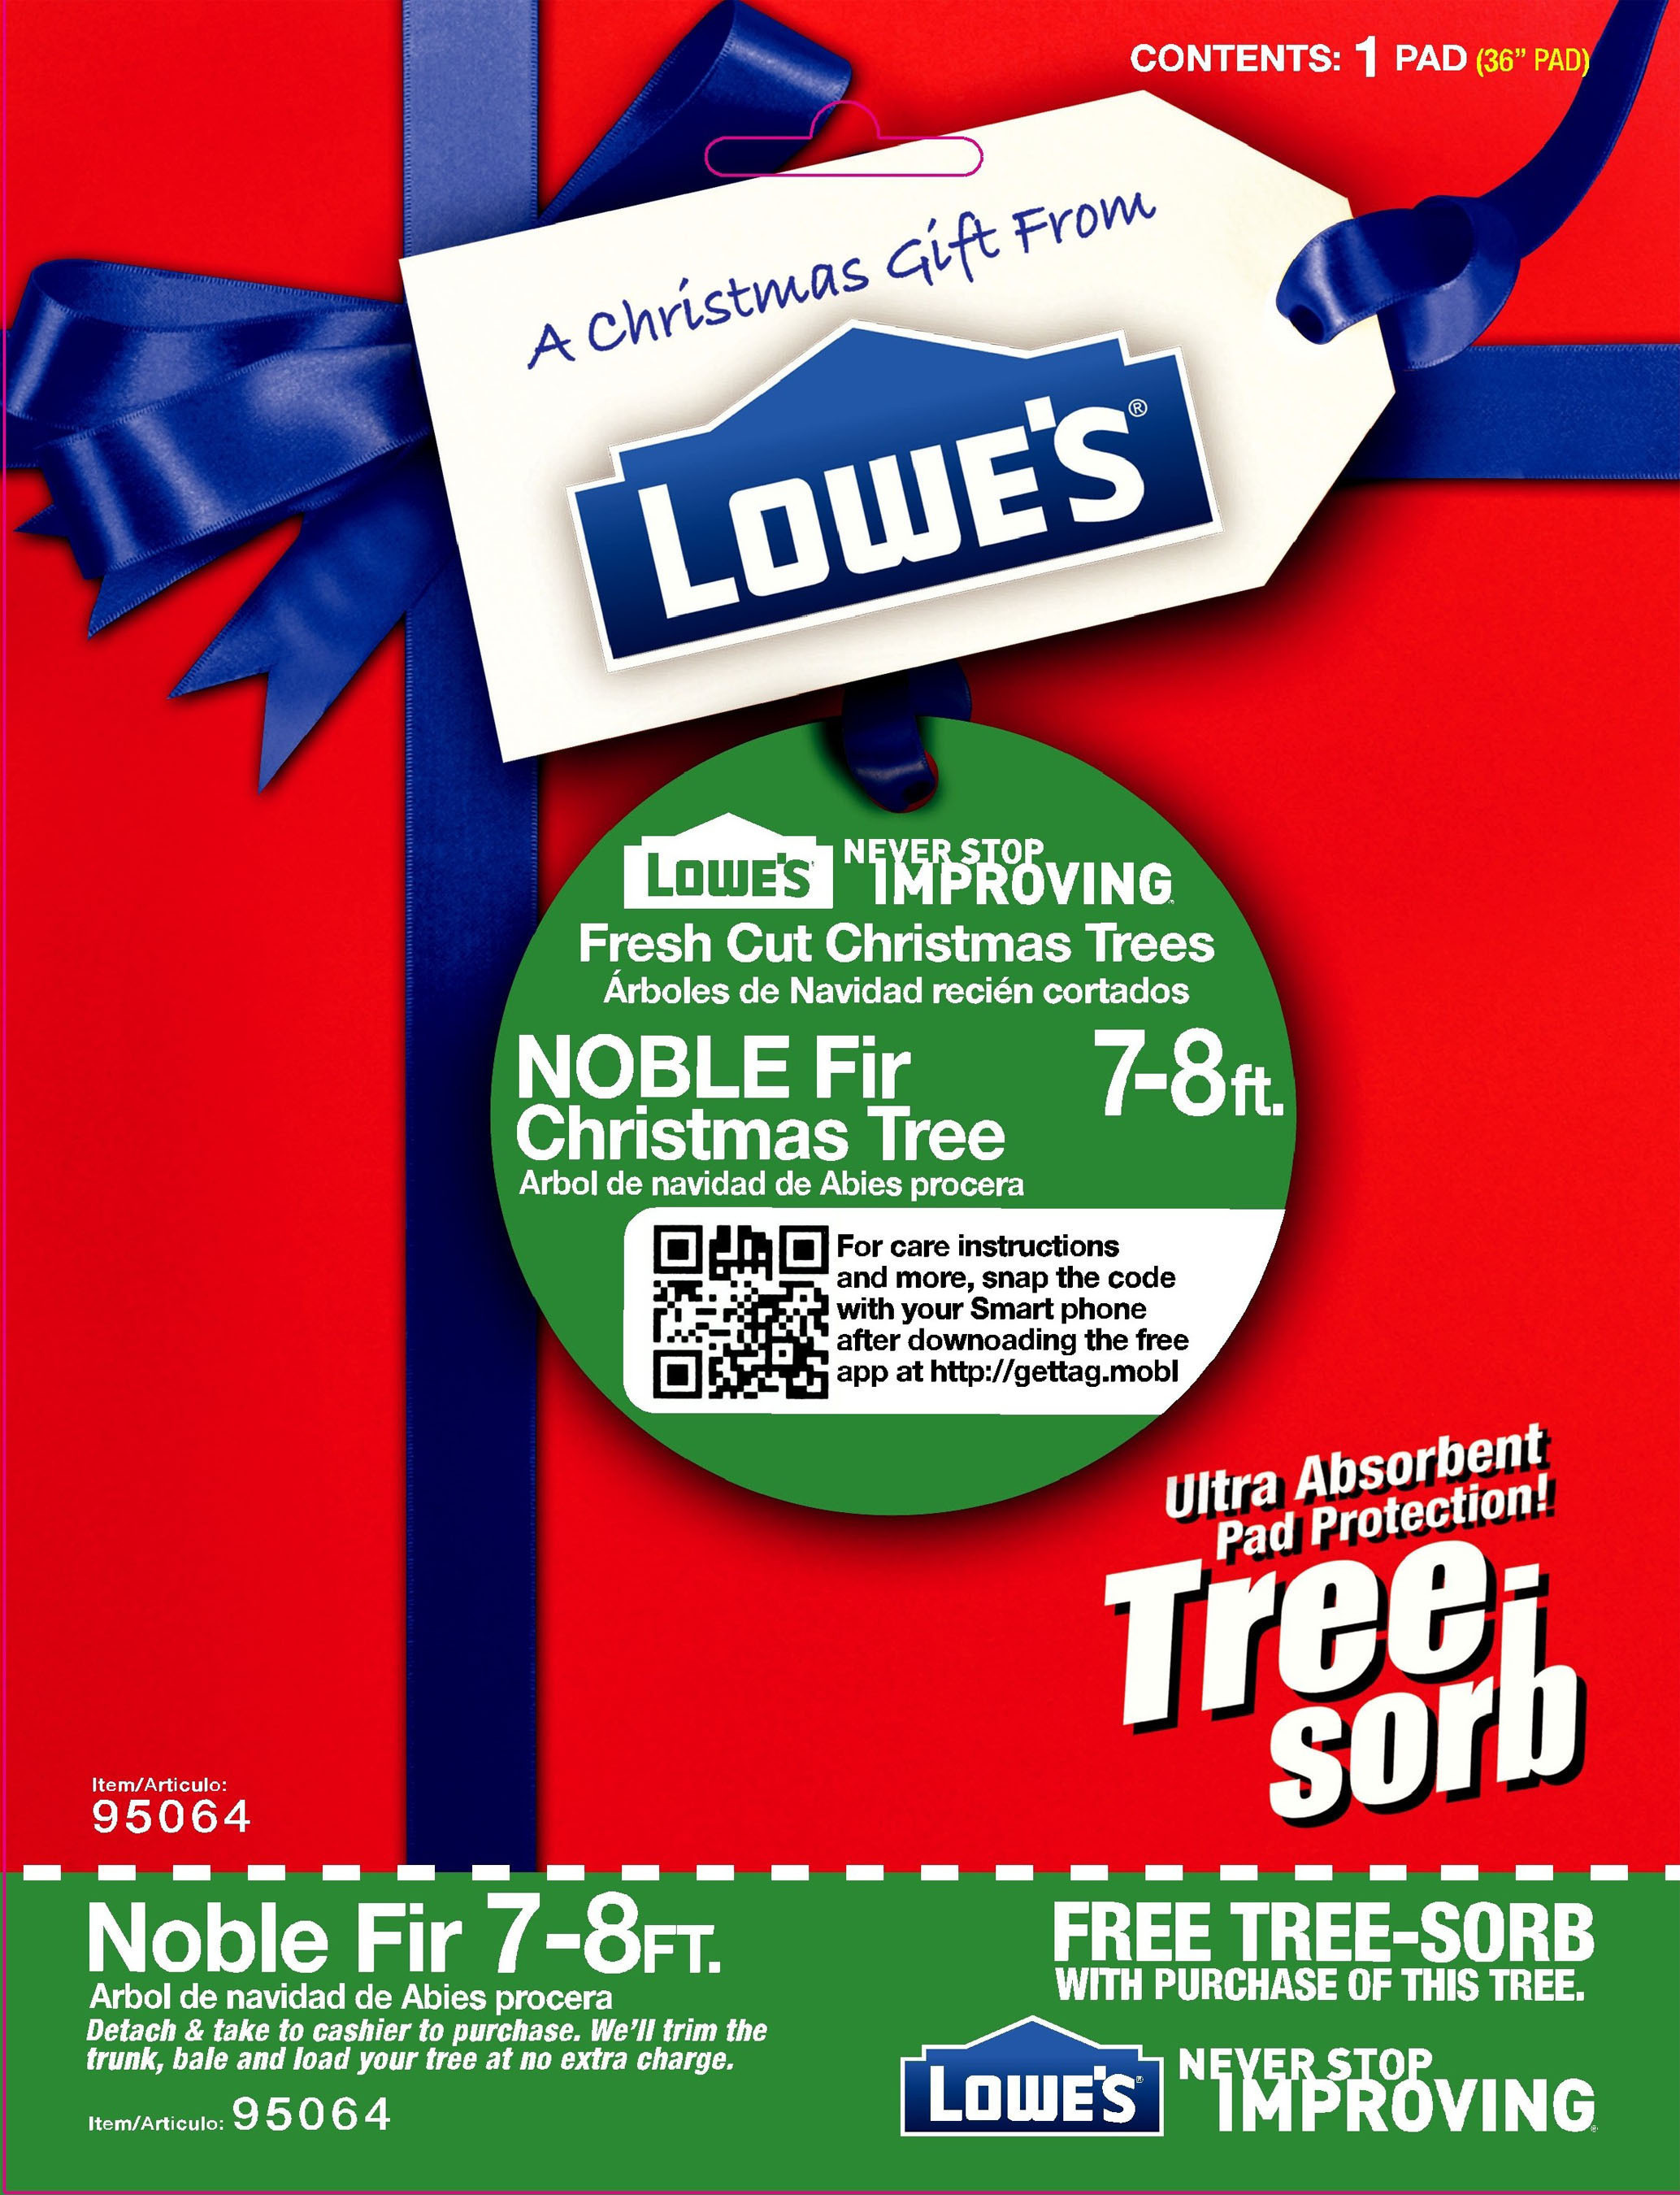 Tree-Sorb Super Absorbent Pad Included with Every Lowe's Live Christmas Tree over 7 Feet. (PRNewsFoto/SORBCO) (PRNewsFoto/SORBCO)